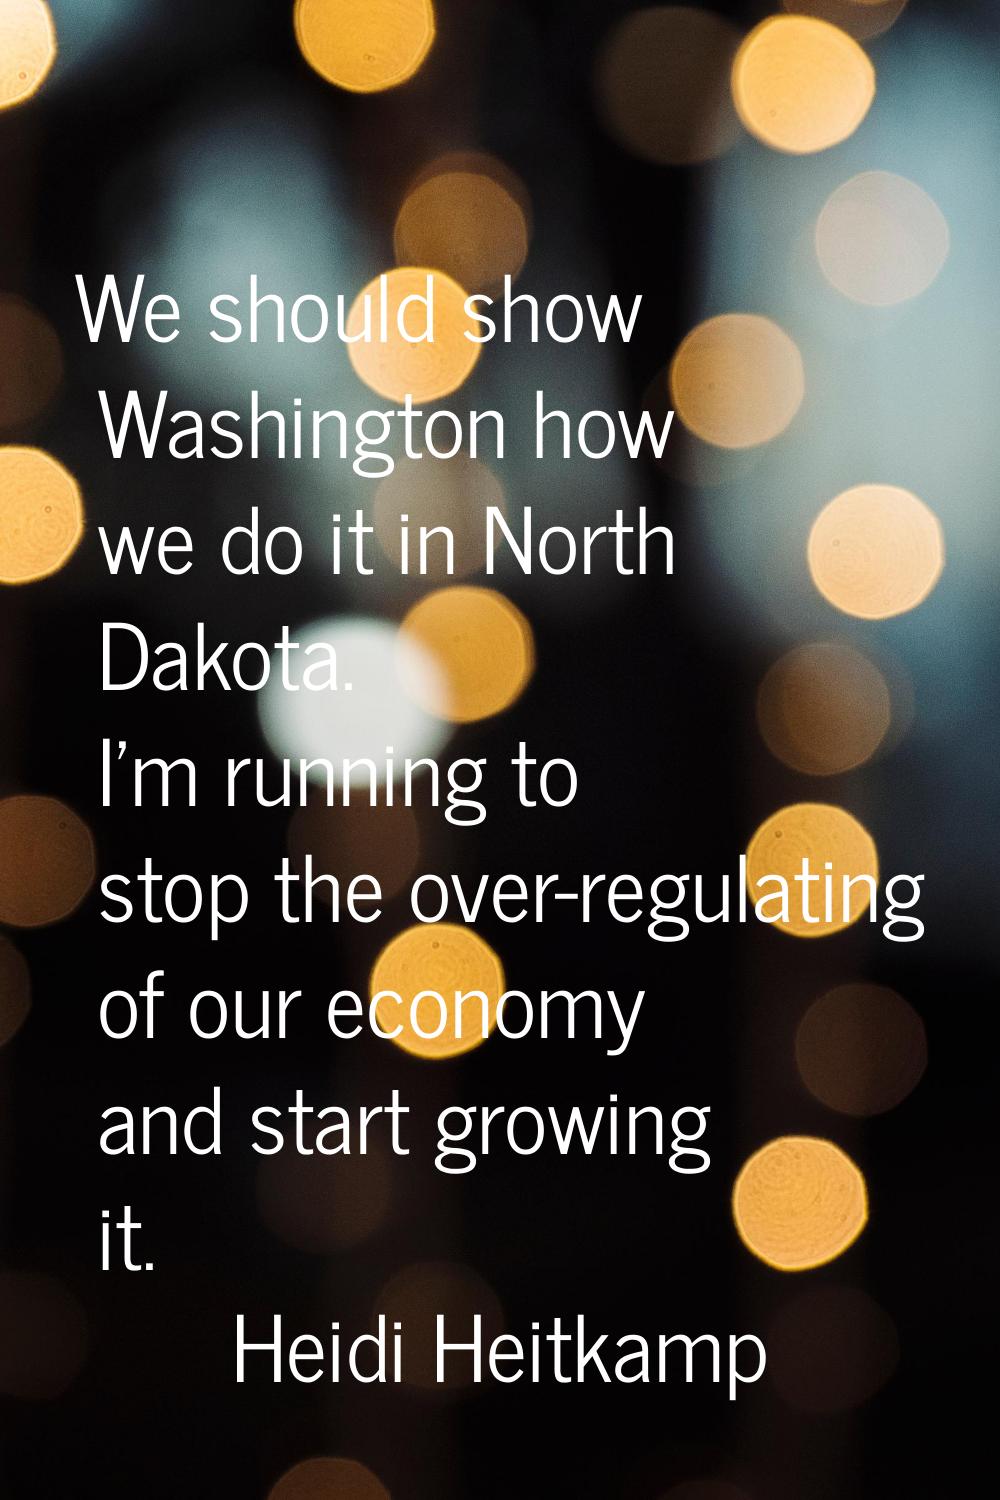 We should show Washington how we do it in North Dakota. I'm running to stop the over-regulating of 